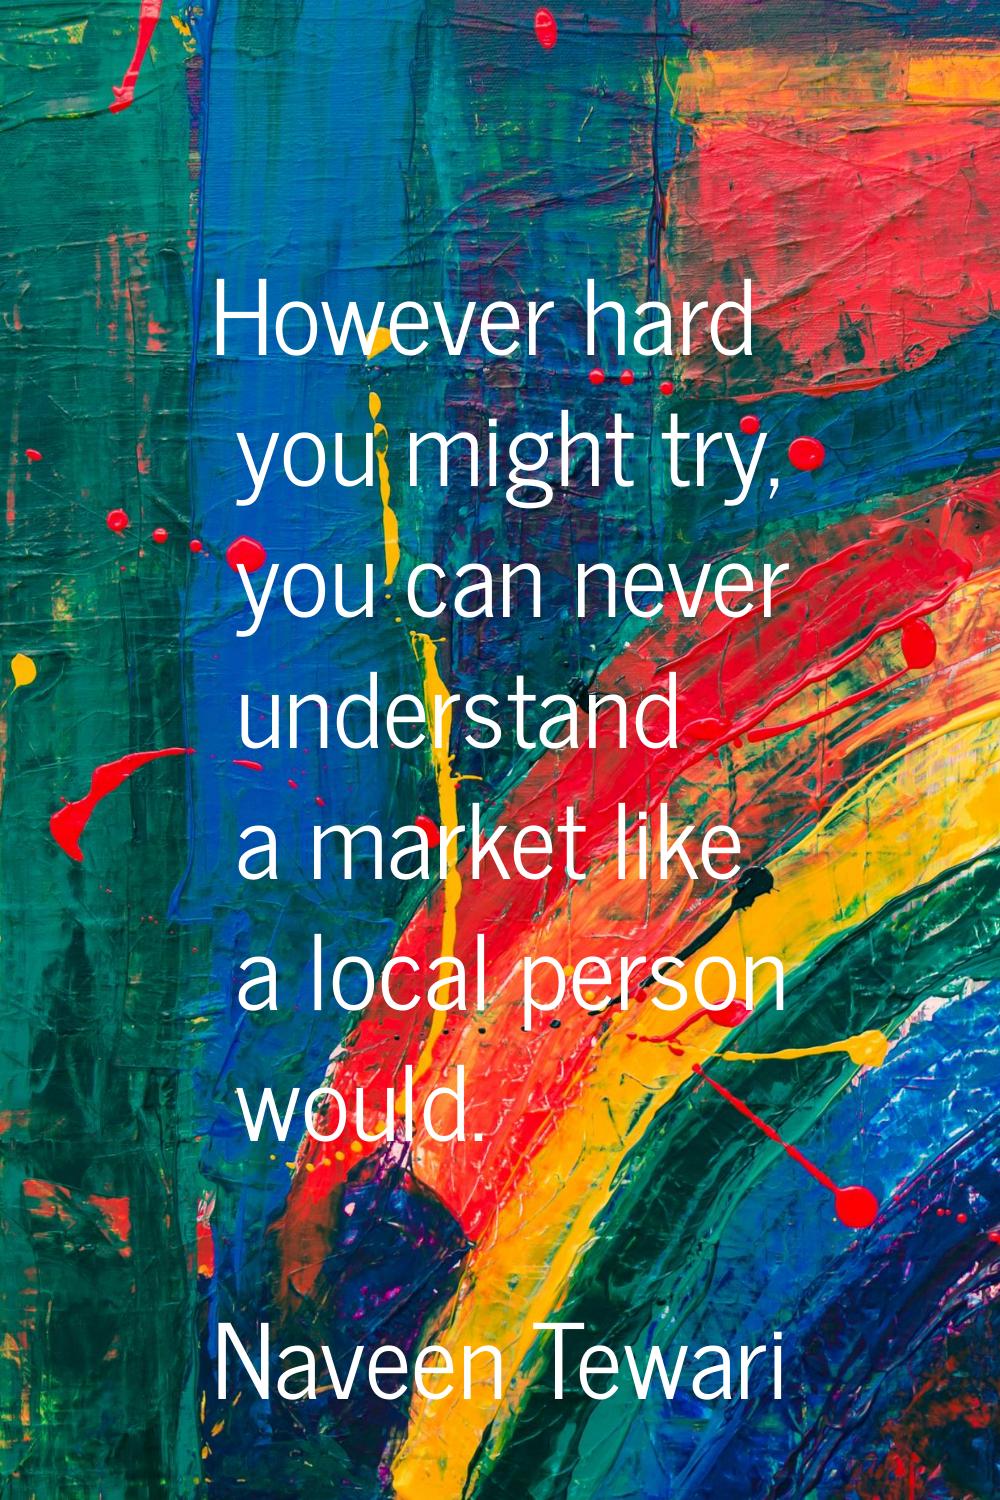 However hard you might try, you can never understand a market like a local person would.